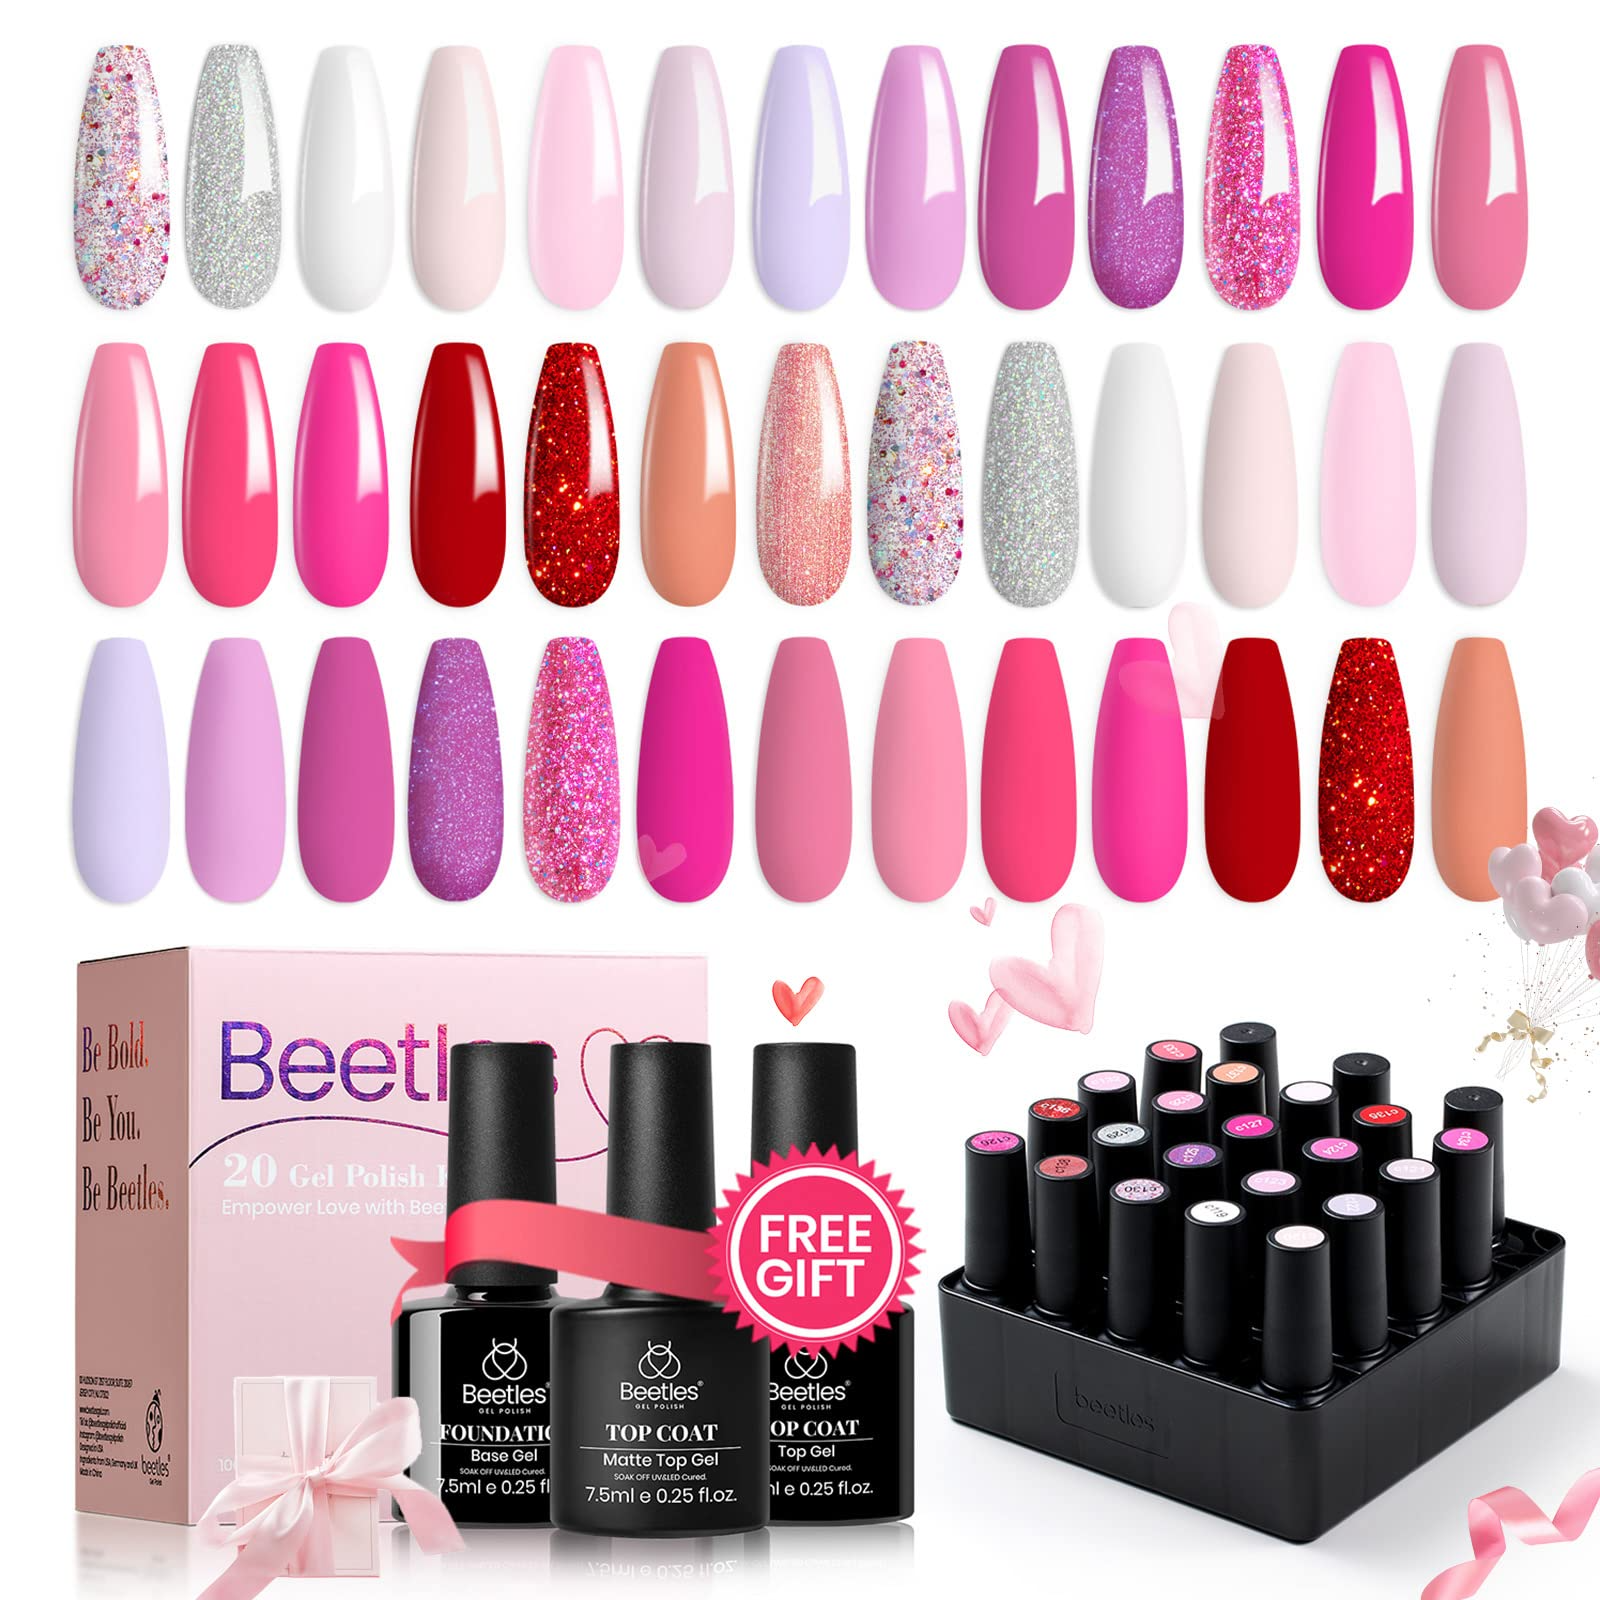 Beetles Gel Polish® - The Best Salon Manicure That You Can Do at Home